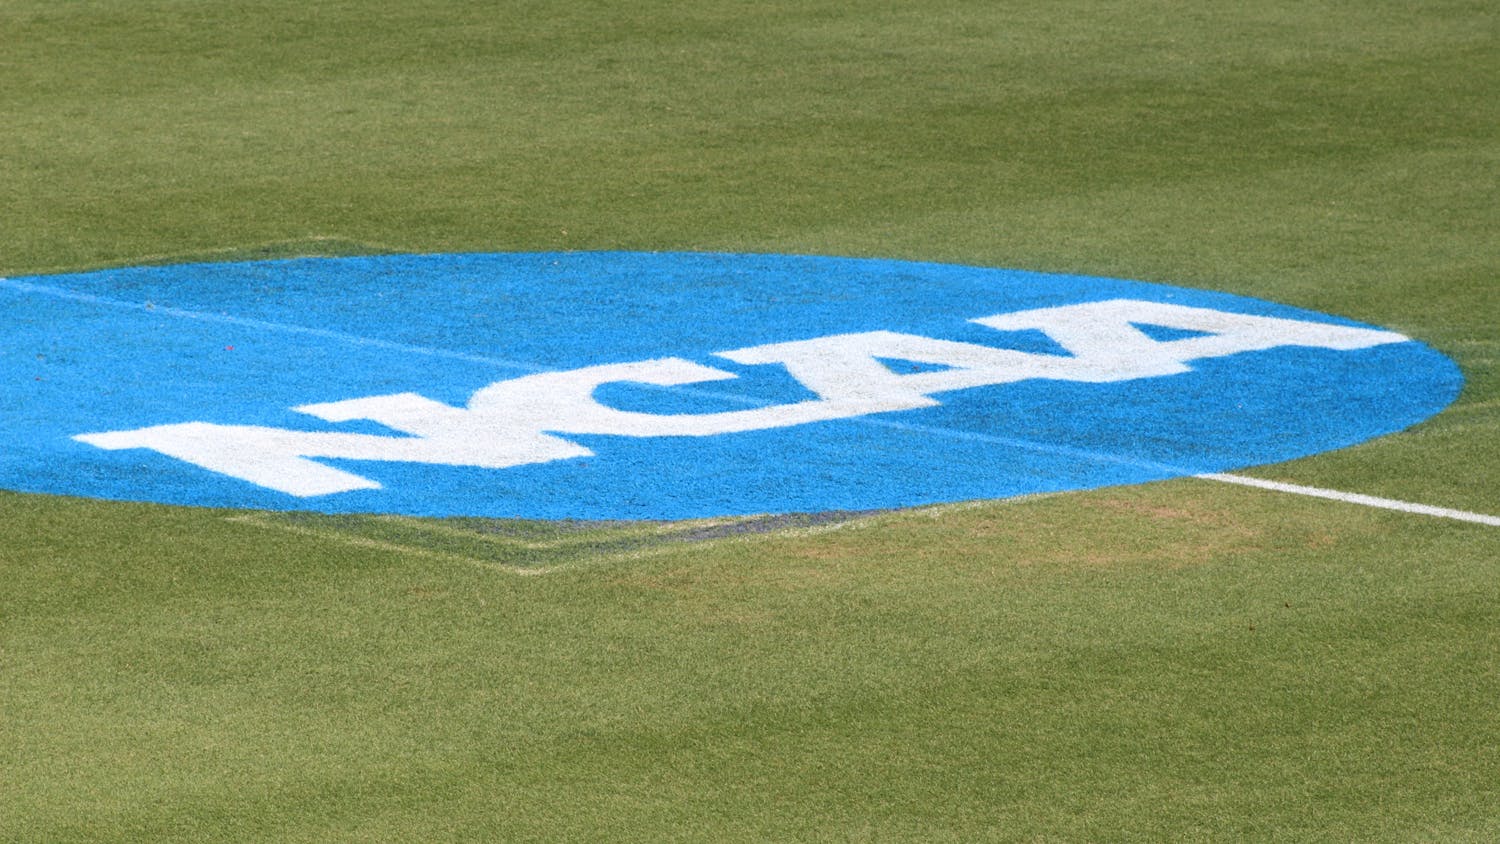 The NCAA announced June 30 increased NIL freedoms for the entire country starting July 1.